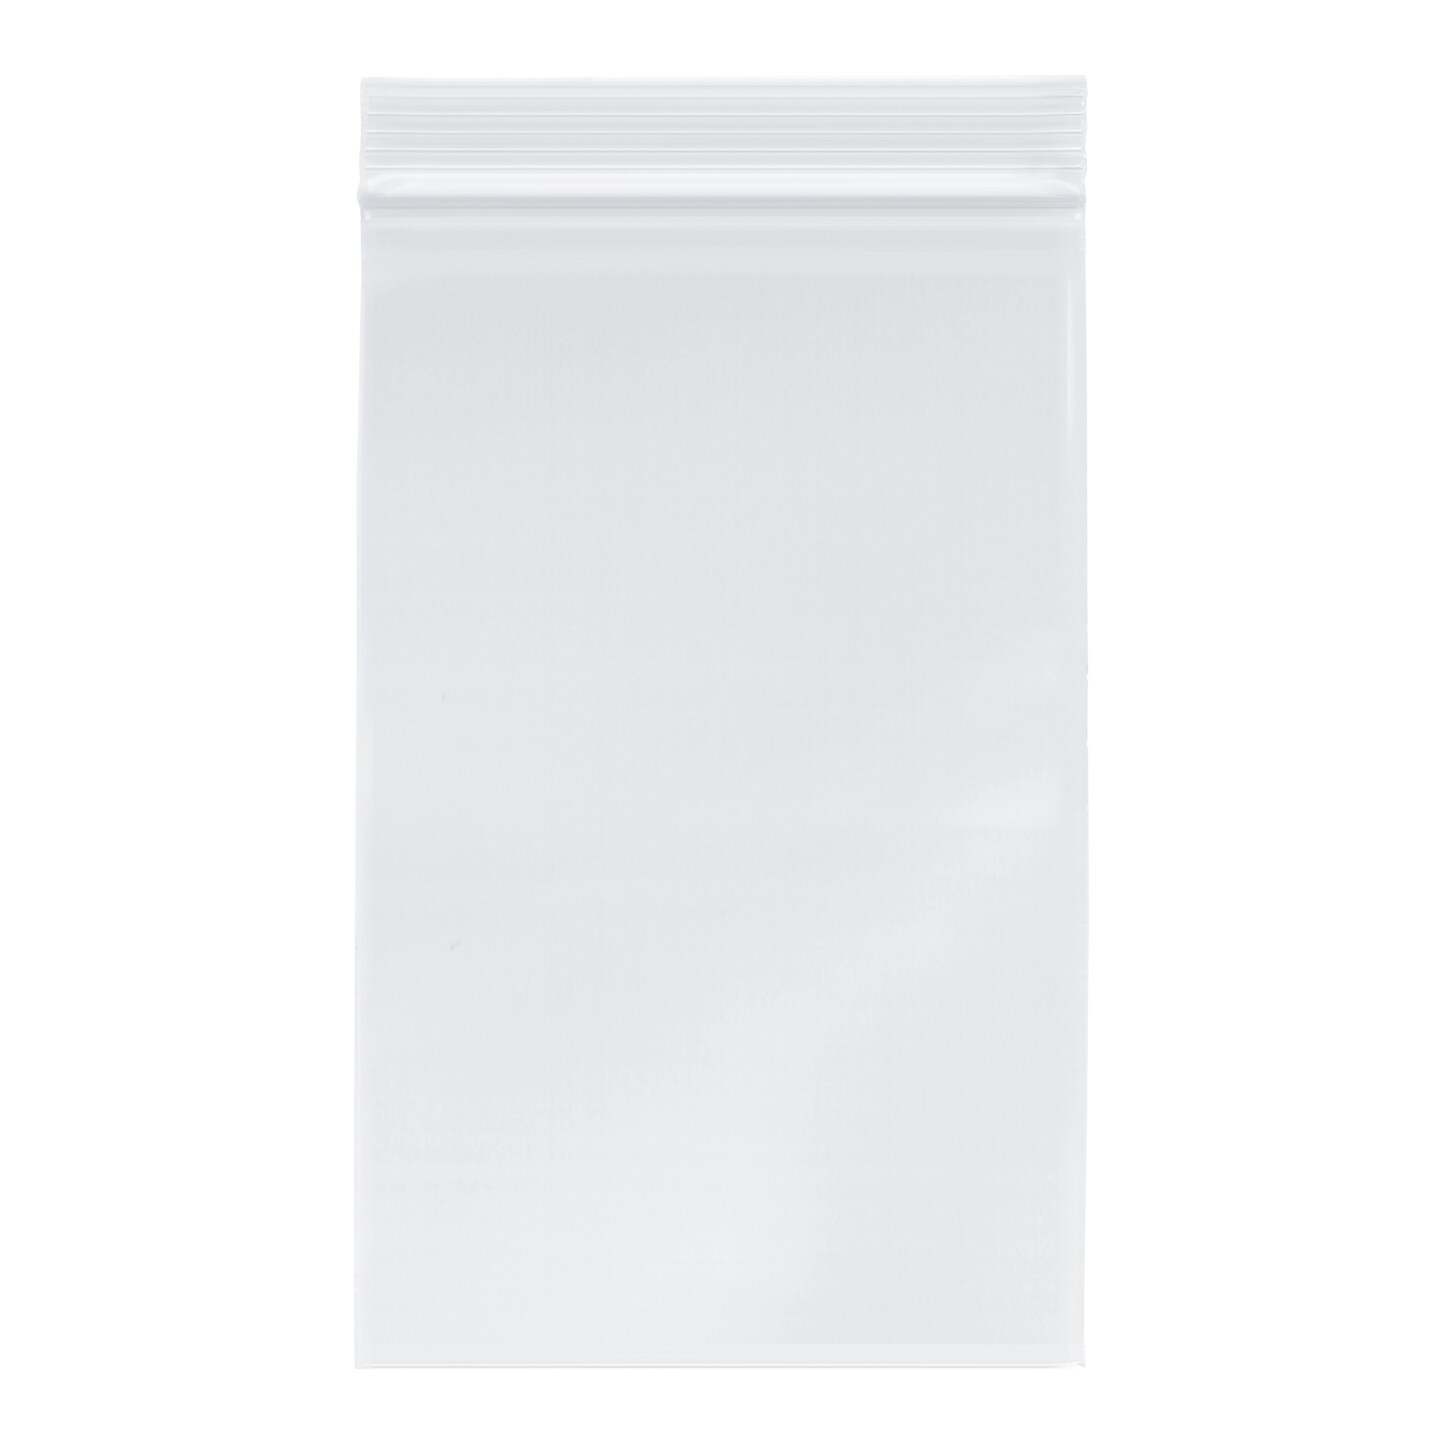 Clear Plastic Zip Bags, 4MIL Heavy Duty Thickness, Reclosable Top